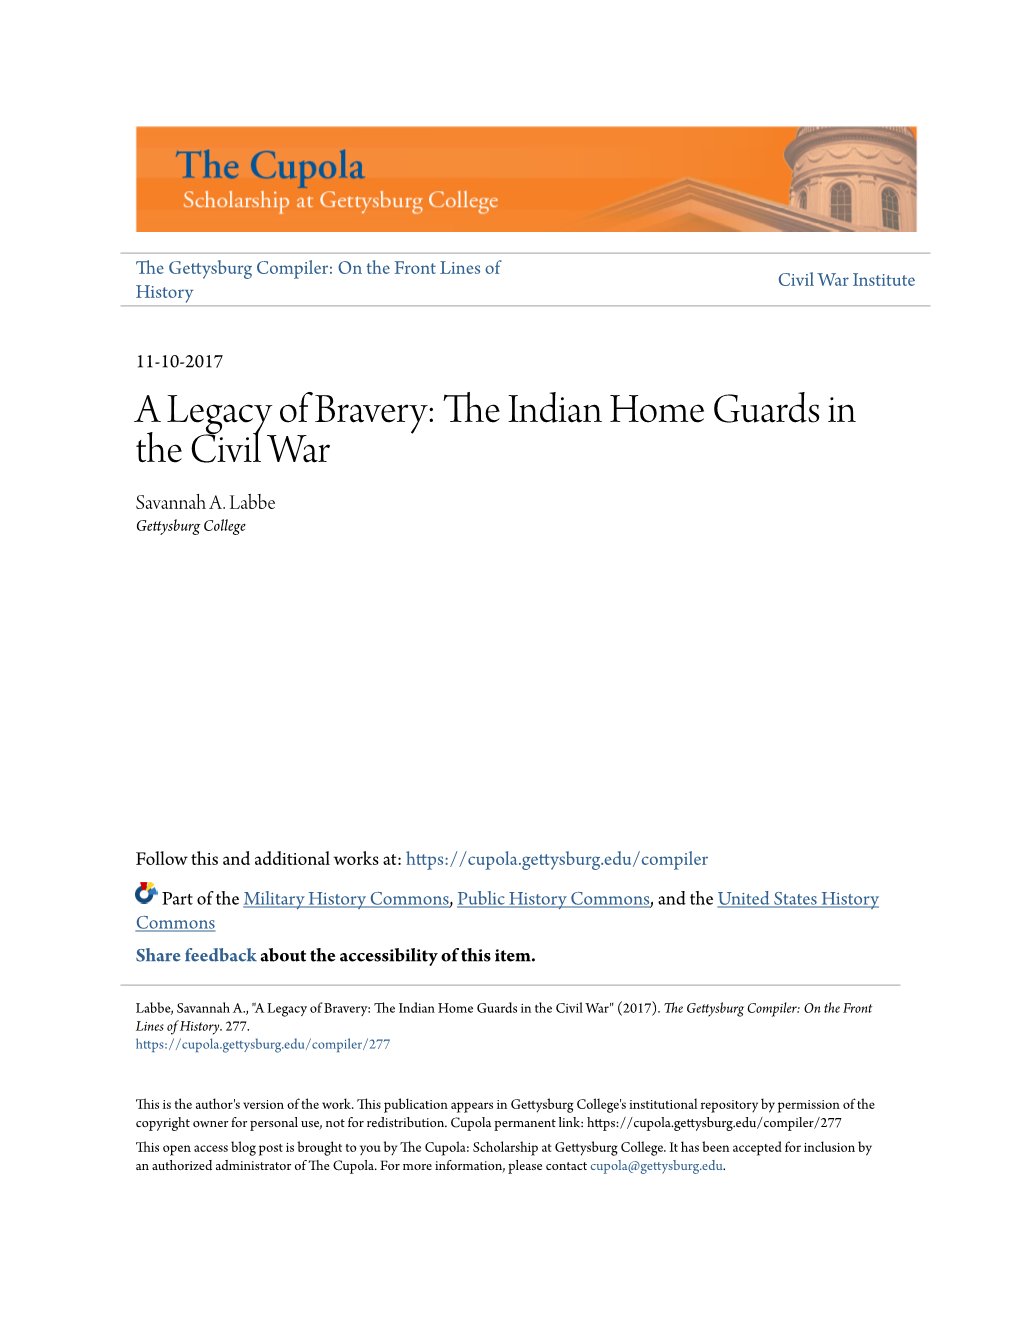 The Indian Home Guards in the Civil War